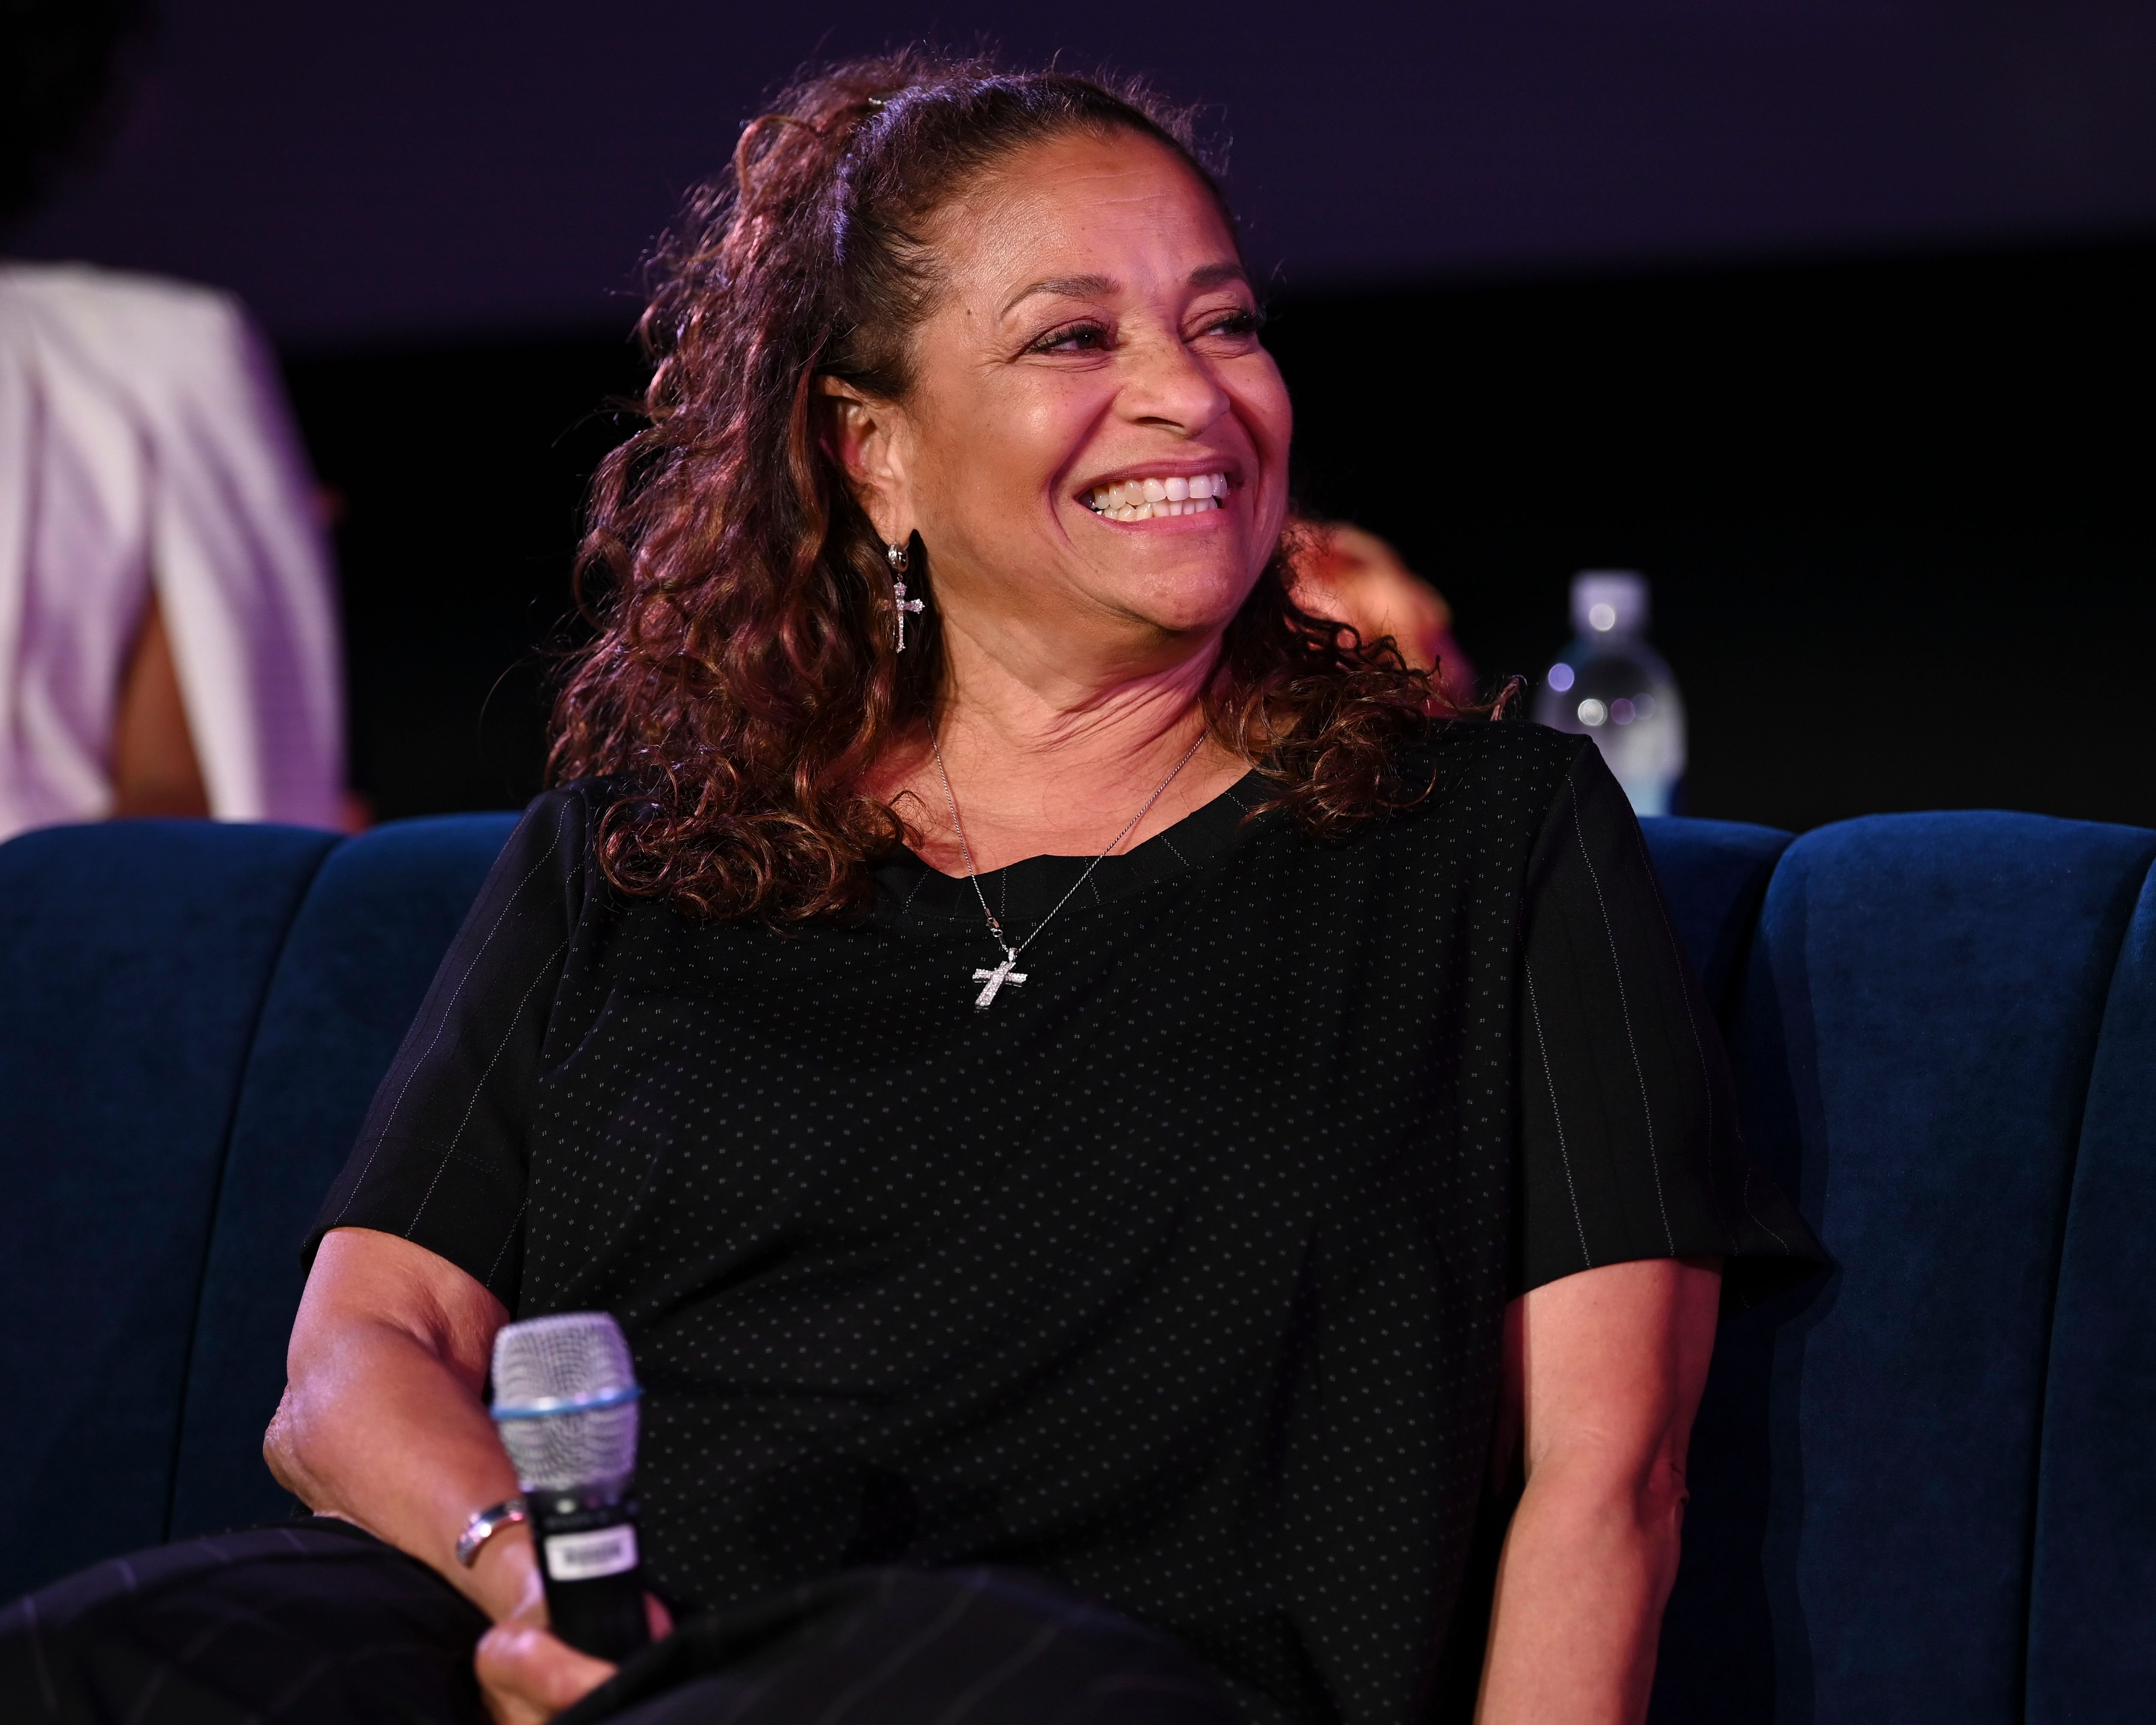 Debbie Allen during the  "For Your Consideration" event for members of the Television Academy at the Walt Disney Studios. | Photo: Getty Images